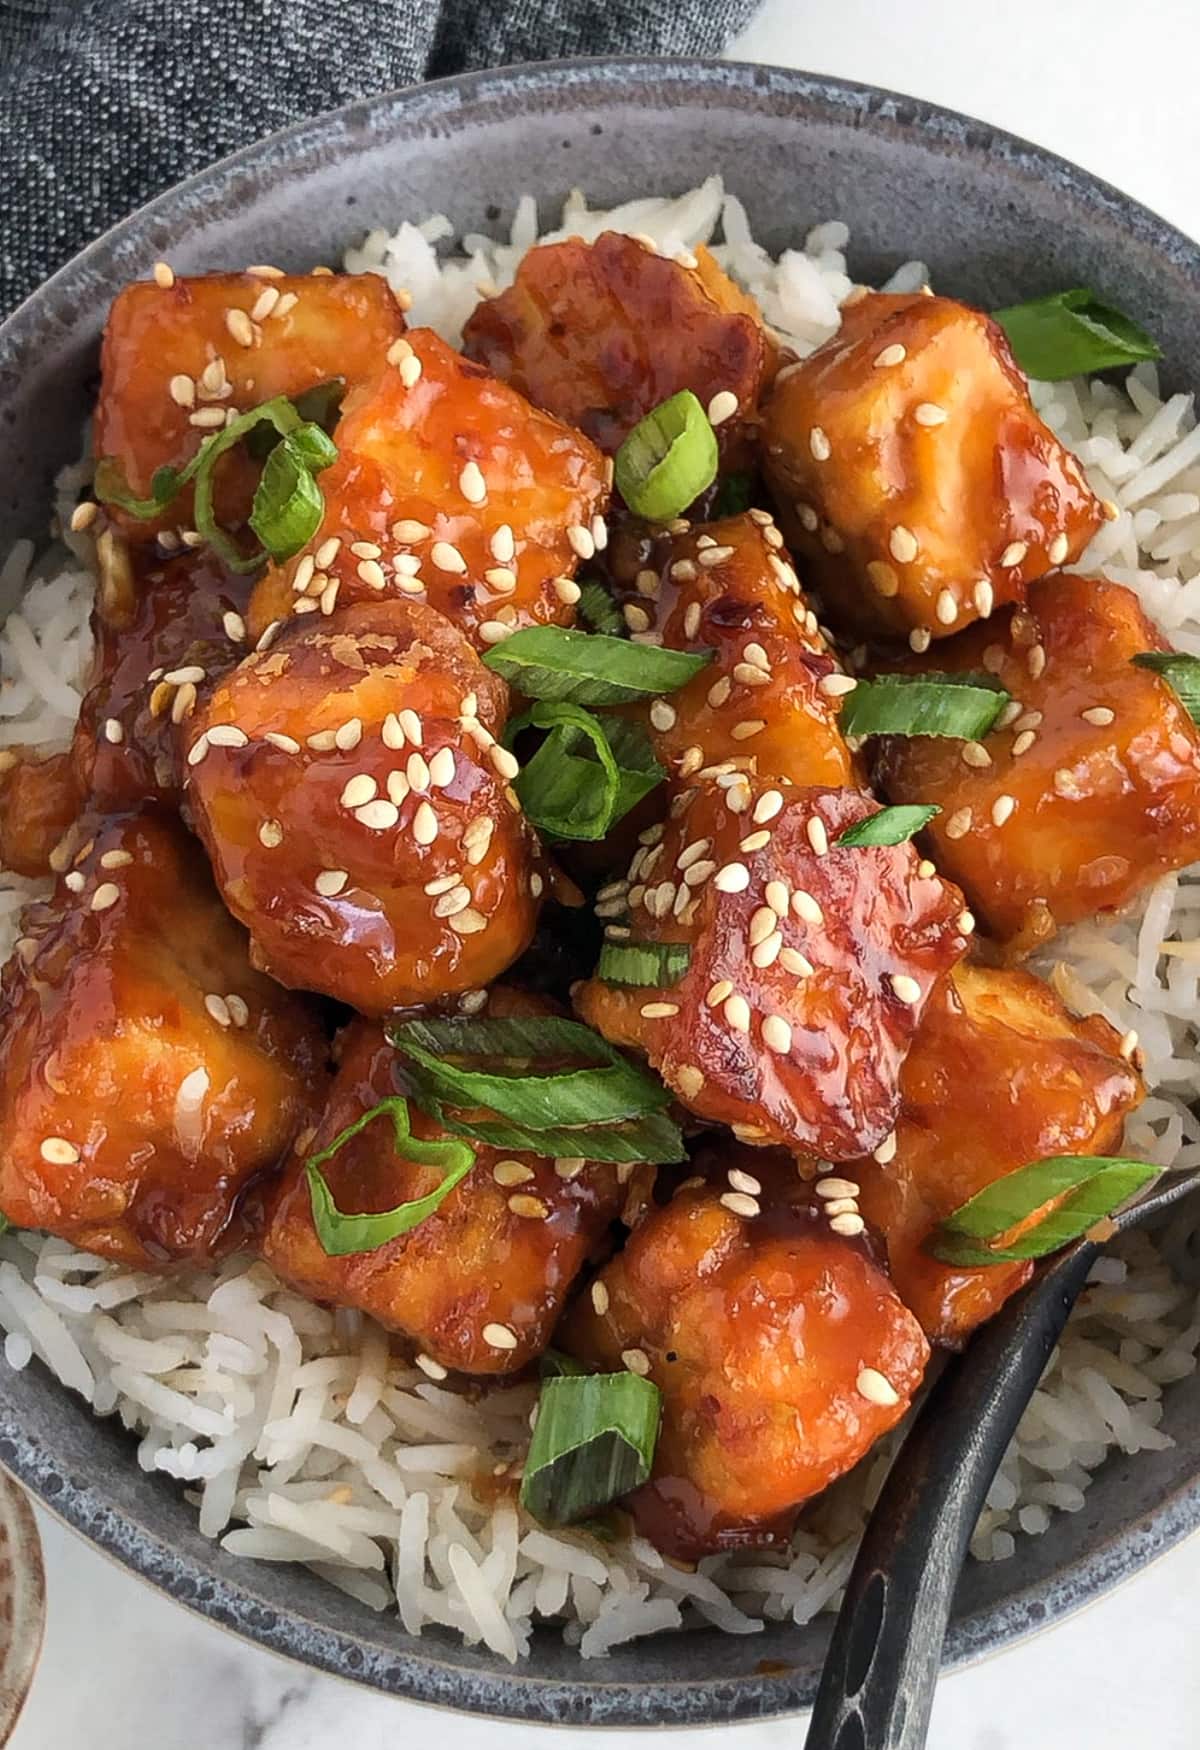 Crispy sesame garlic tofu served on rice and garnished with sliced green onions and sesame seeds.